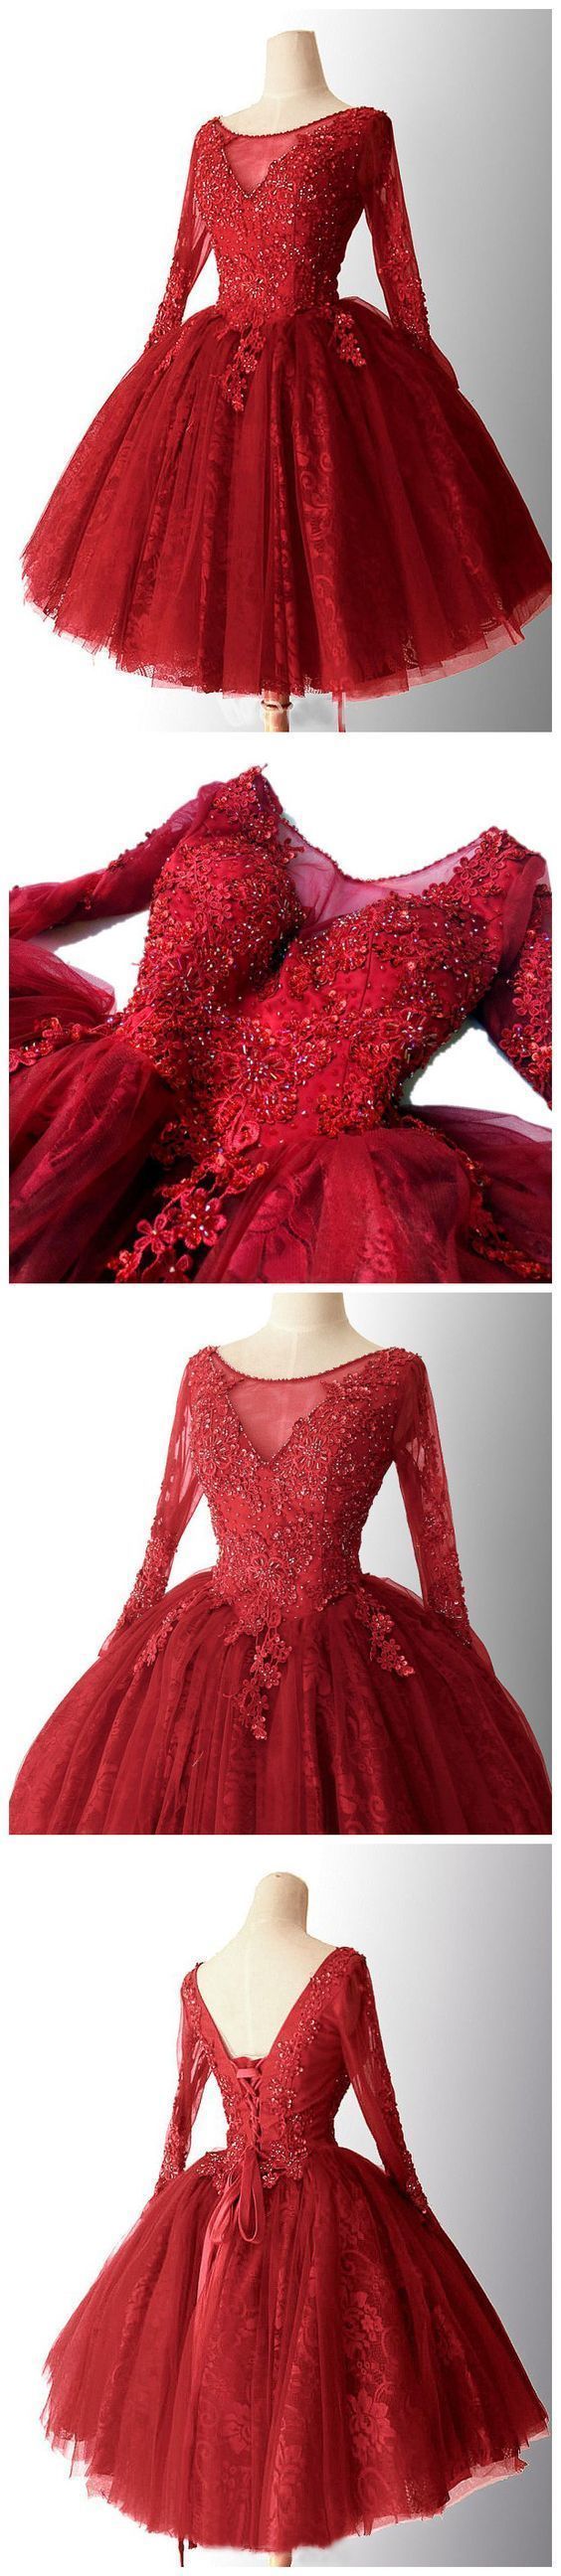 2020 Chic A-line Red Homecoming Dresses Lace Short Prom Dress Long Sleeve Homecoming Dress M9371